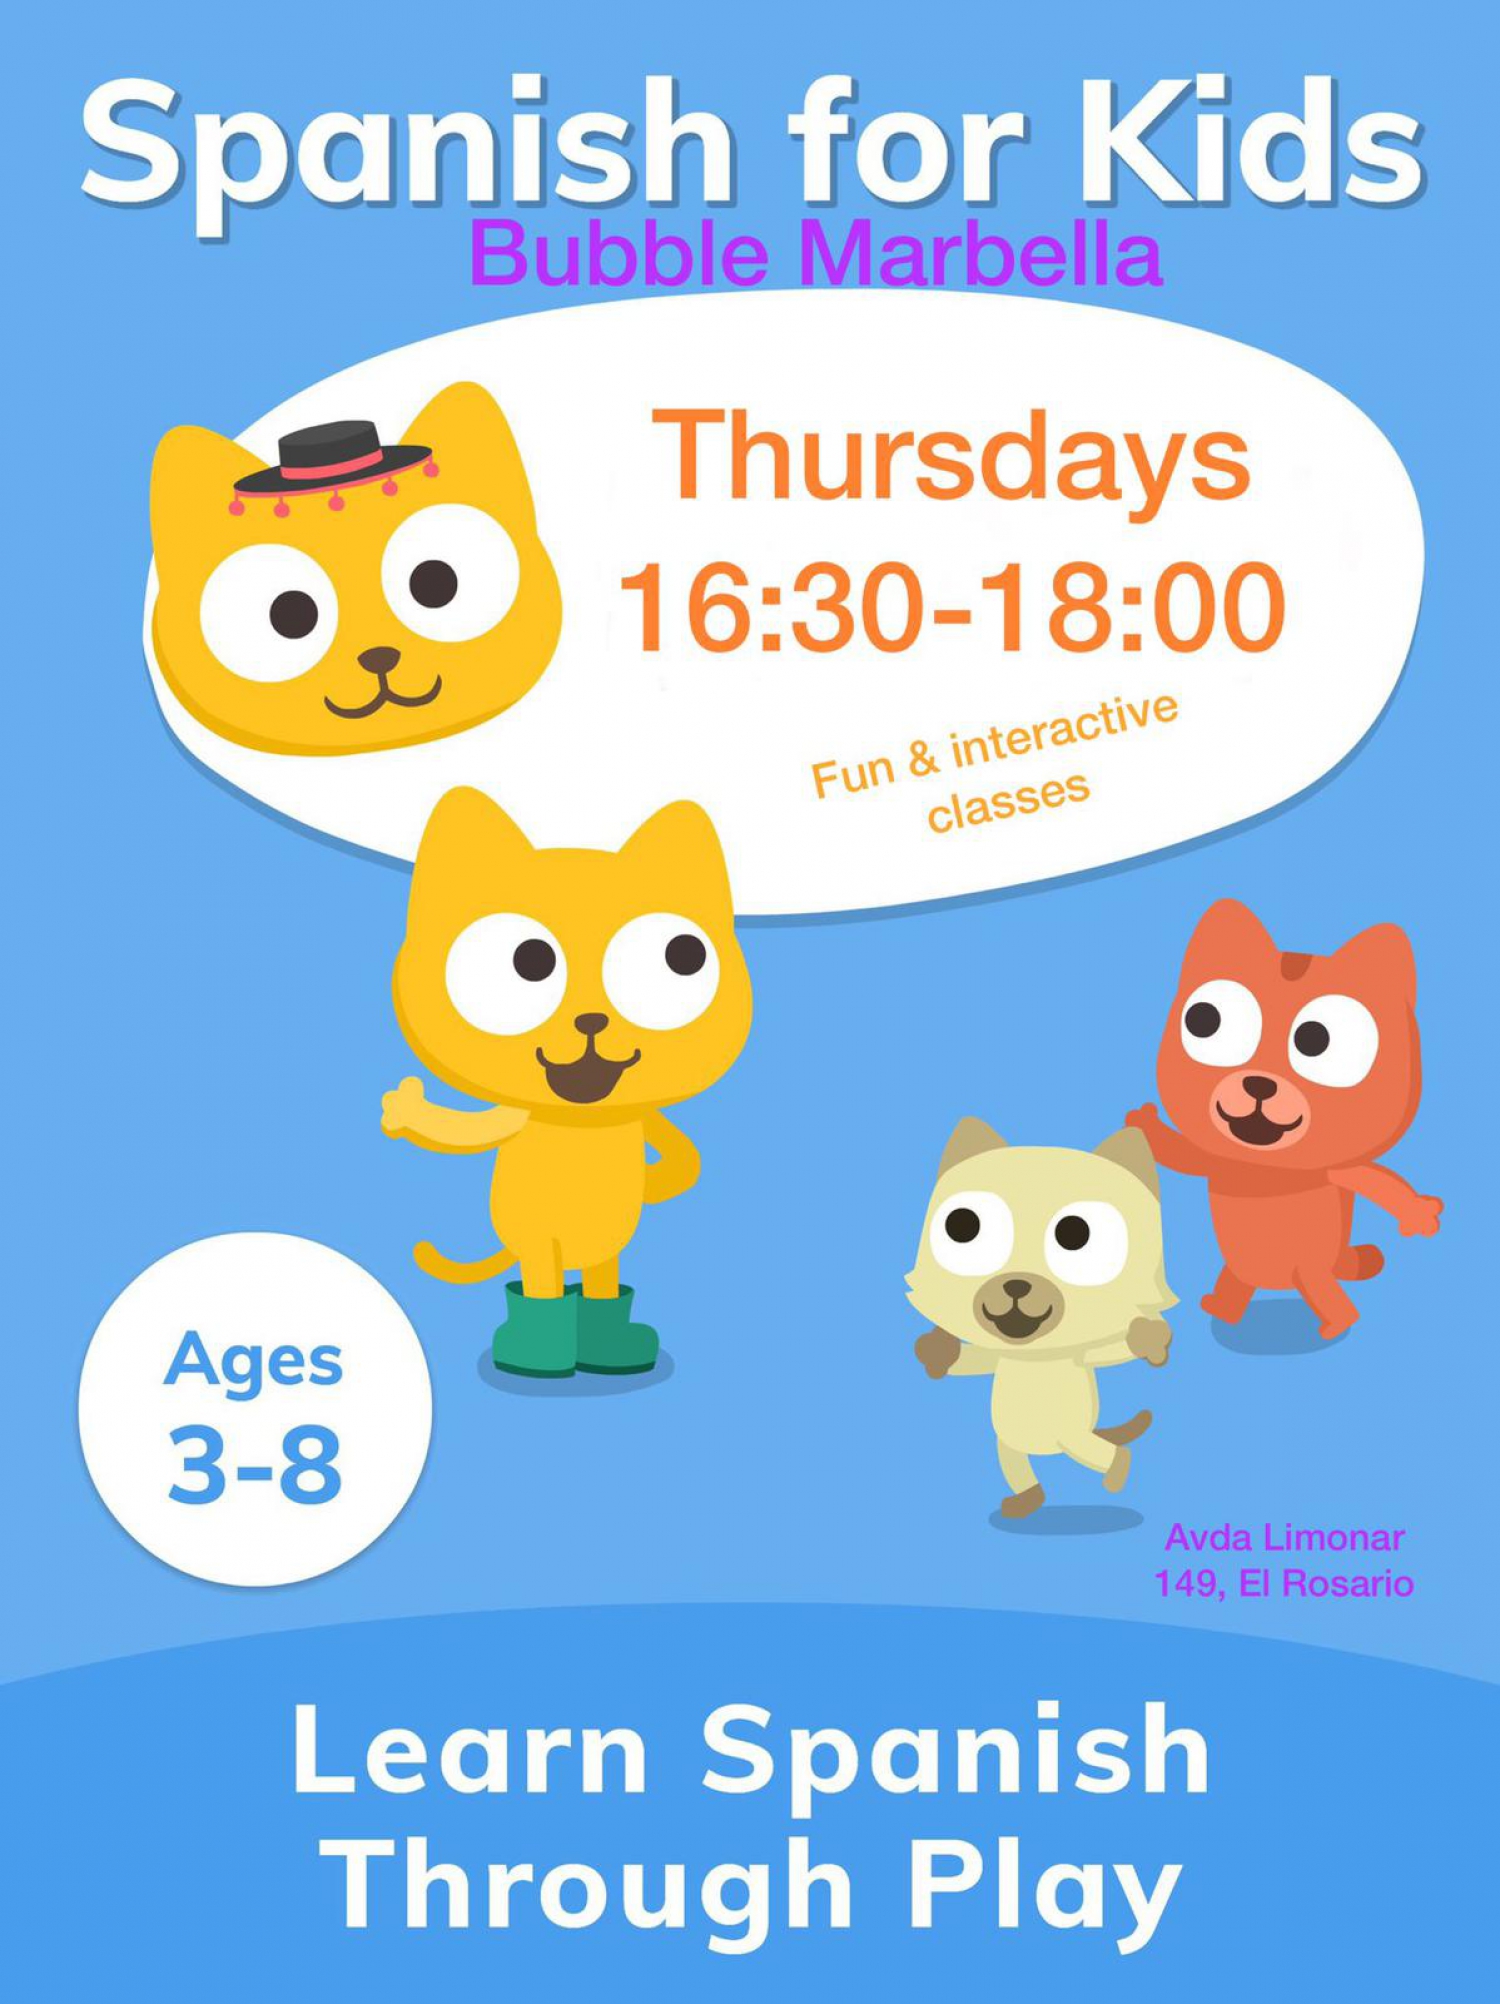 Spanish for Kids at Bubble